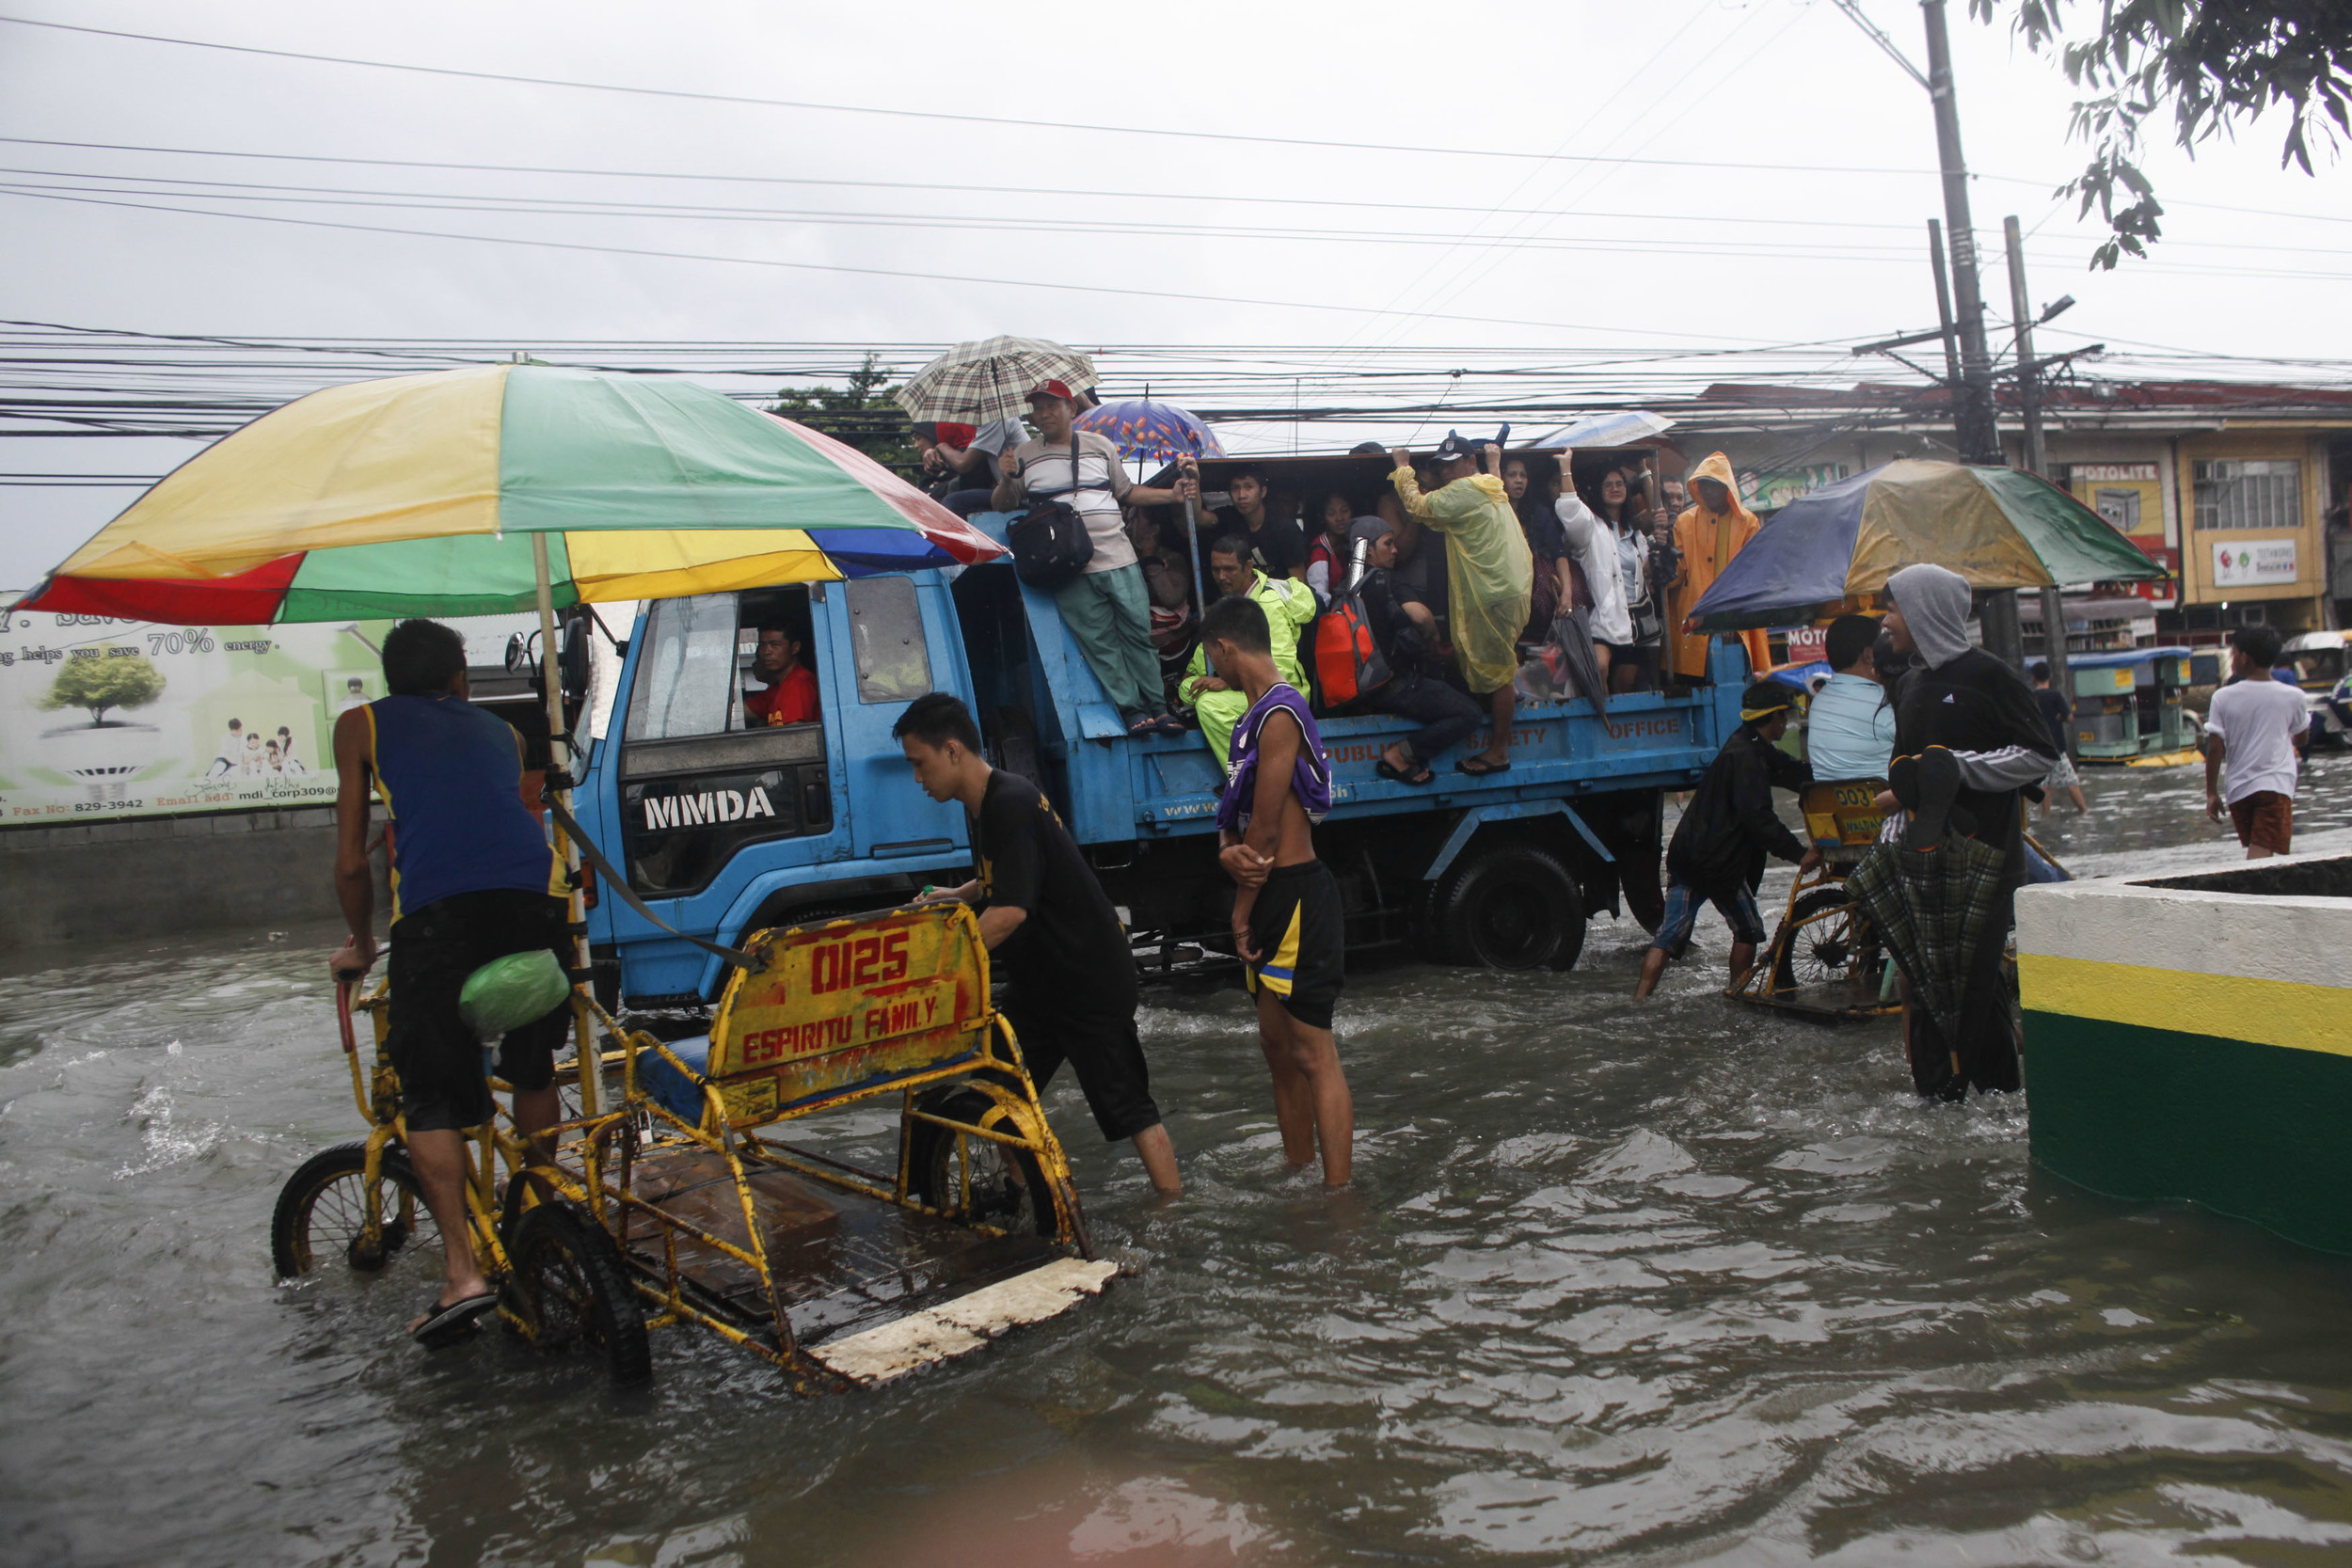  Residents begin to clean their homes submerged in floodwaters caused by monsoon rains in Sucat, Paranaque south of Metro Manila August 19, 2013. Heavy rain in the Philippine capital forced the closure of government offices, schools, banks and most p